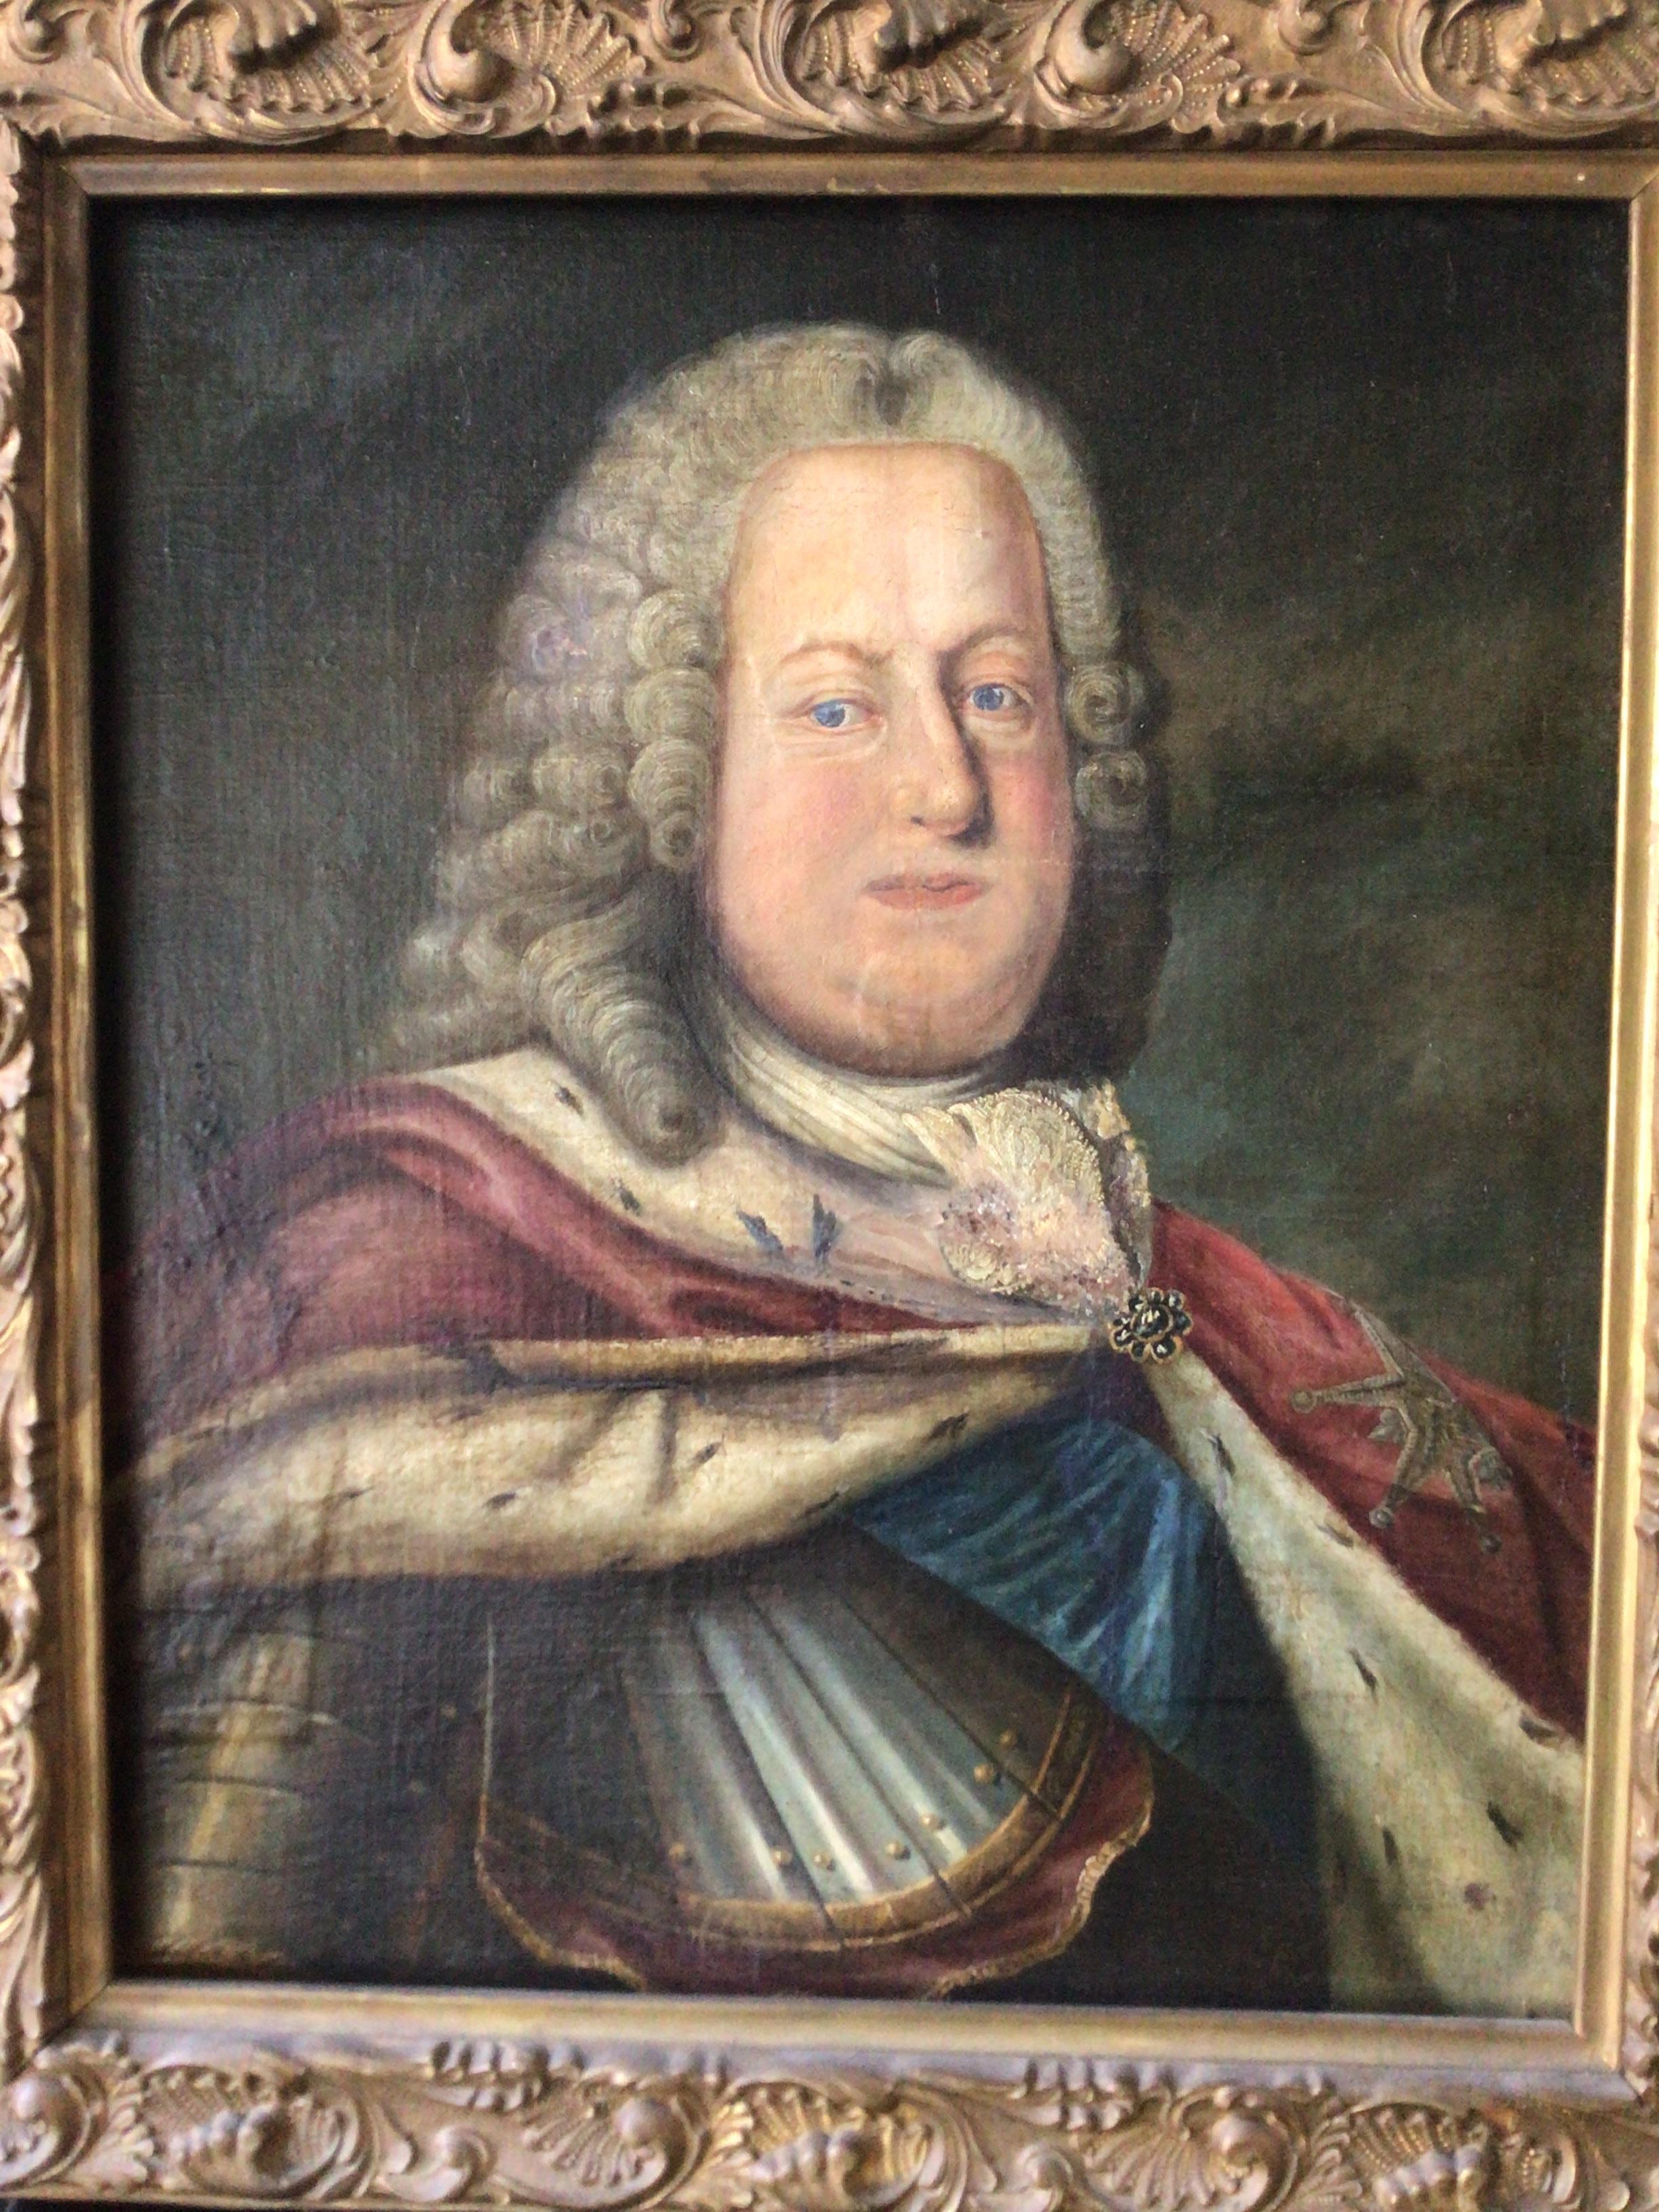 Painted portrait of a 1700s French Nobleman on Masonite board done in the 1950s.